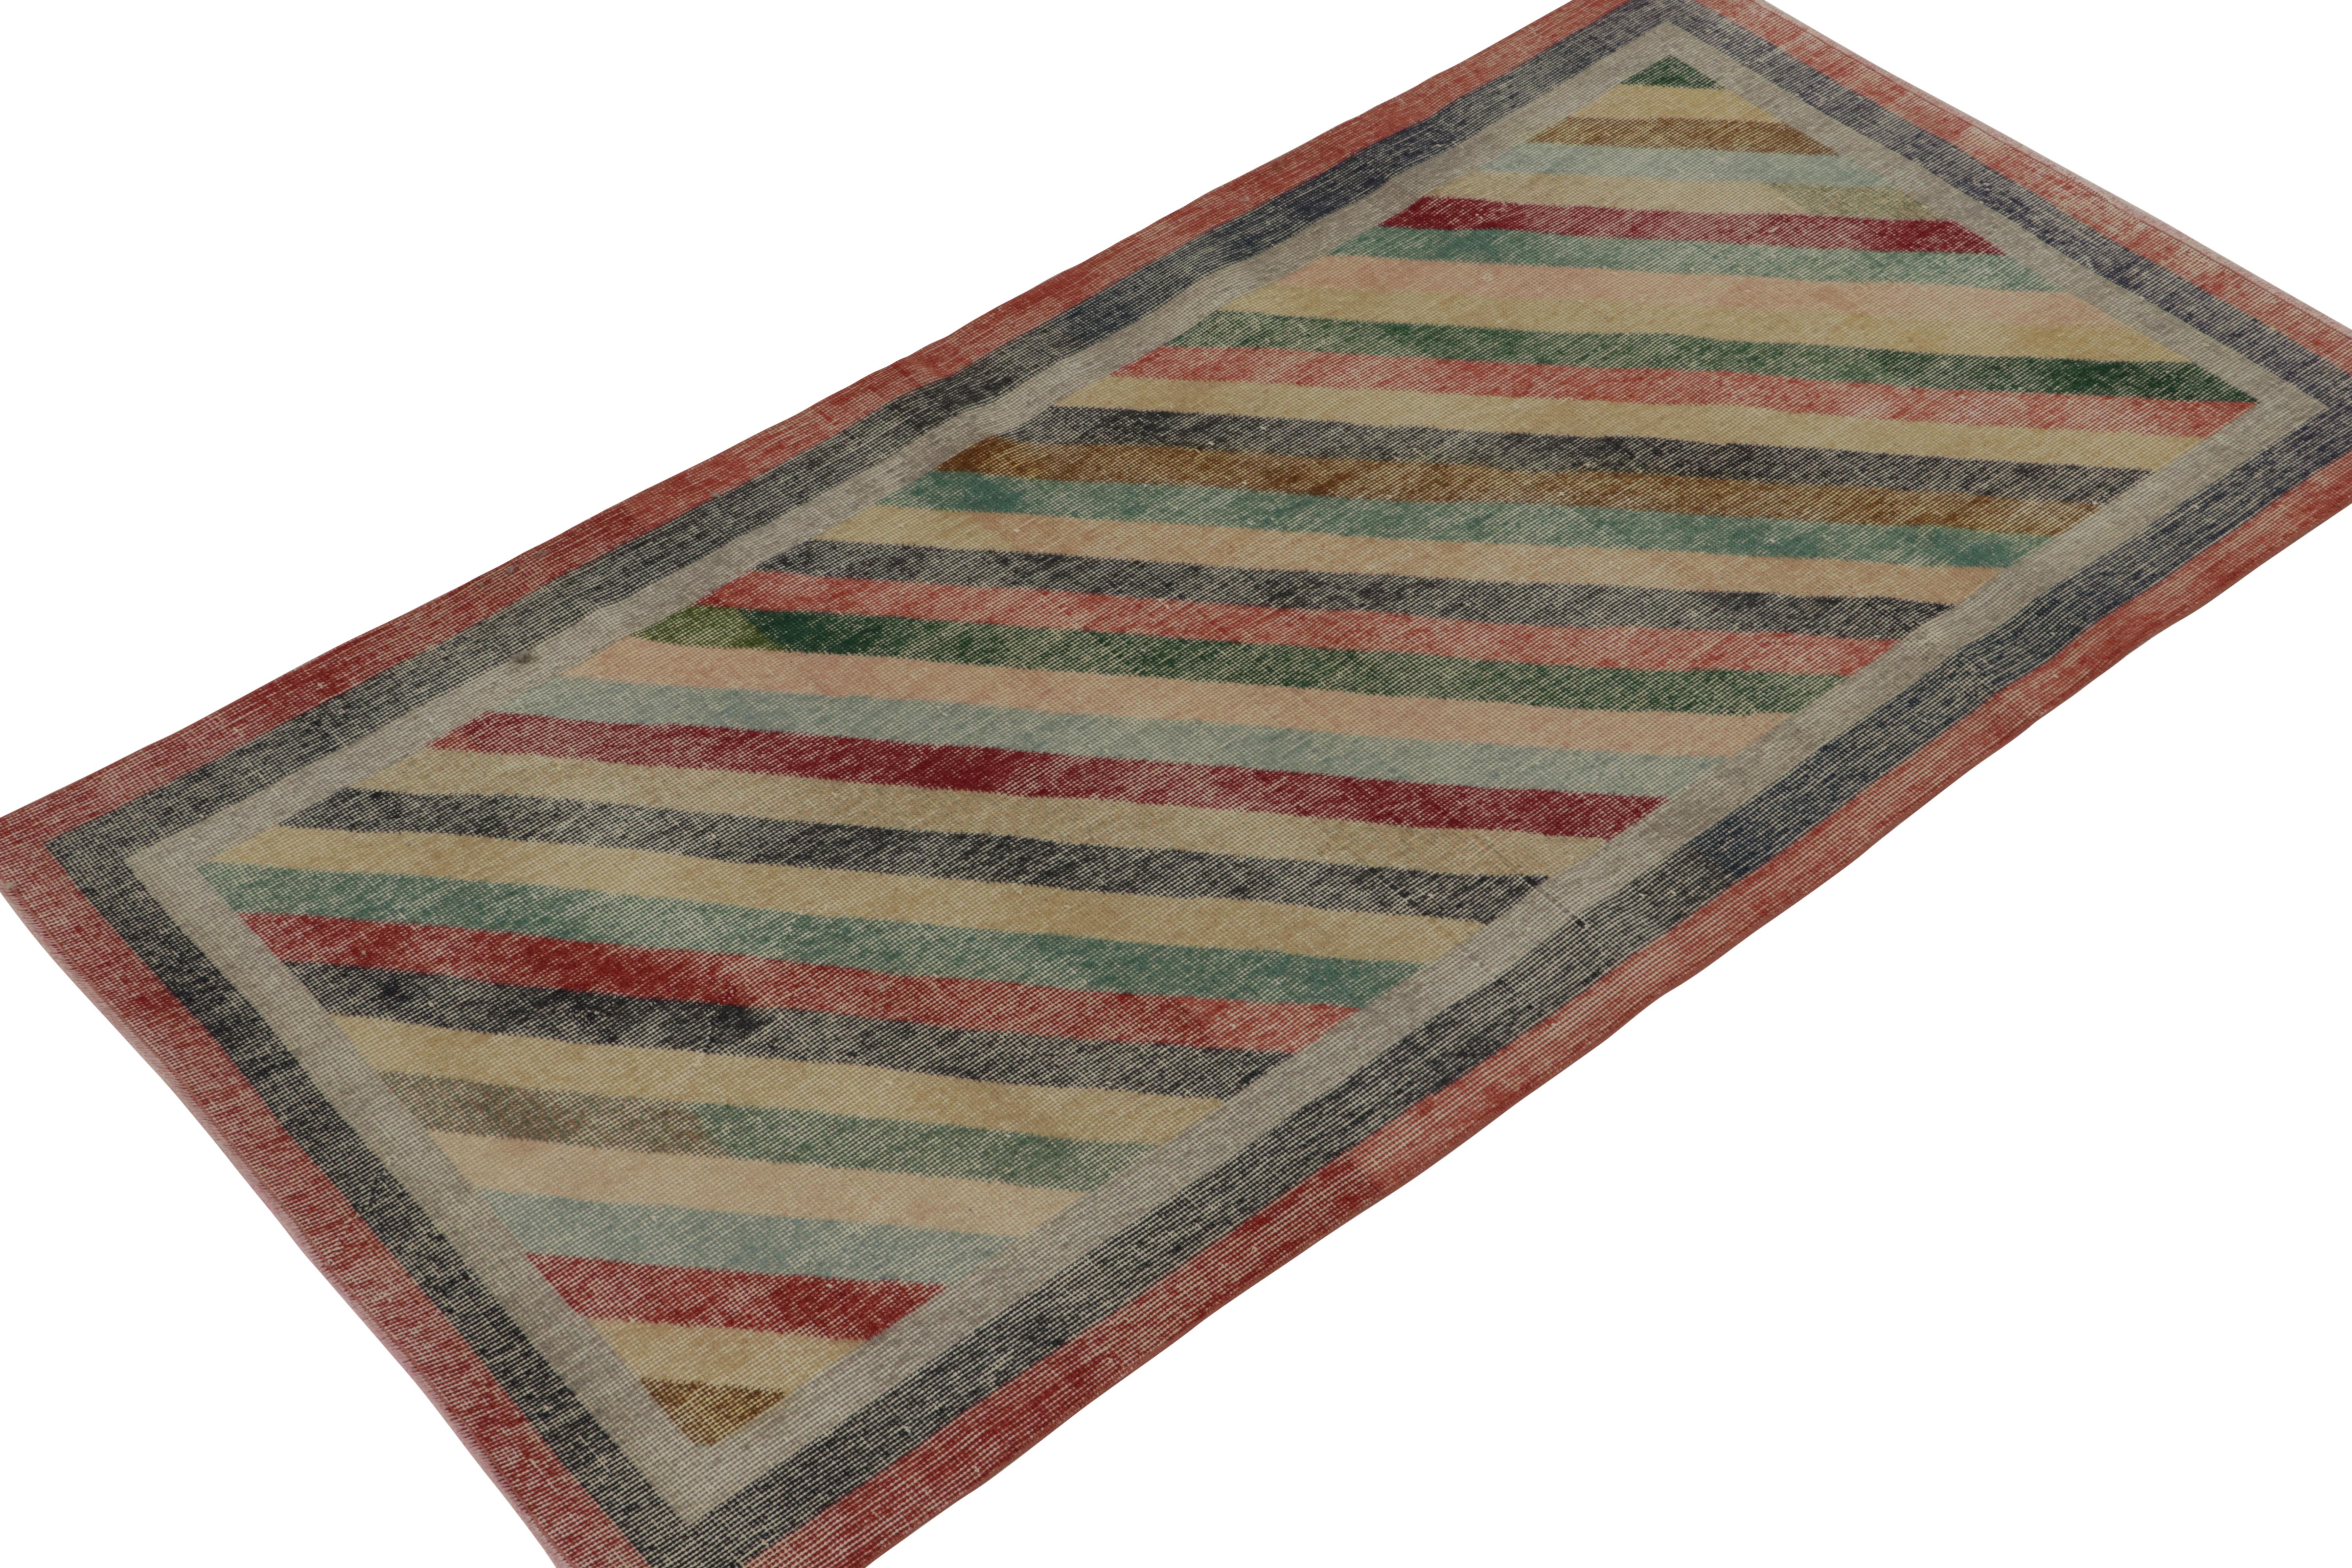 This vintage 4x8 rug is a new addition to Rug & Kilim’s Mid-Century Pasha Collection. This line is a commemoration, with rare curations we believe to hail from multidisciplinary Turkish designer Zeki Müren.

Further on the Design:

This distressed